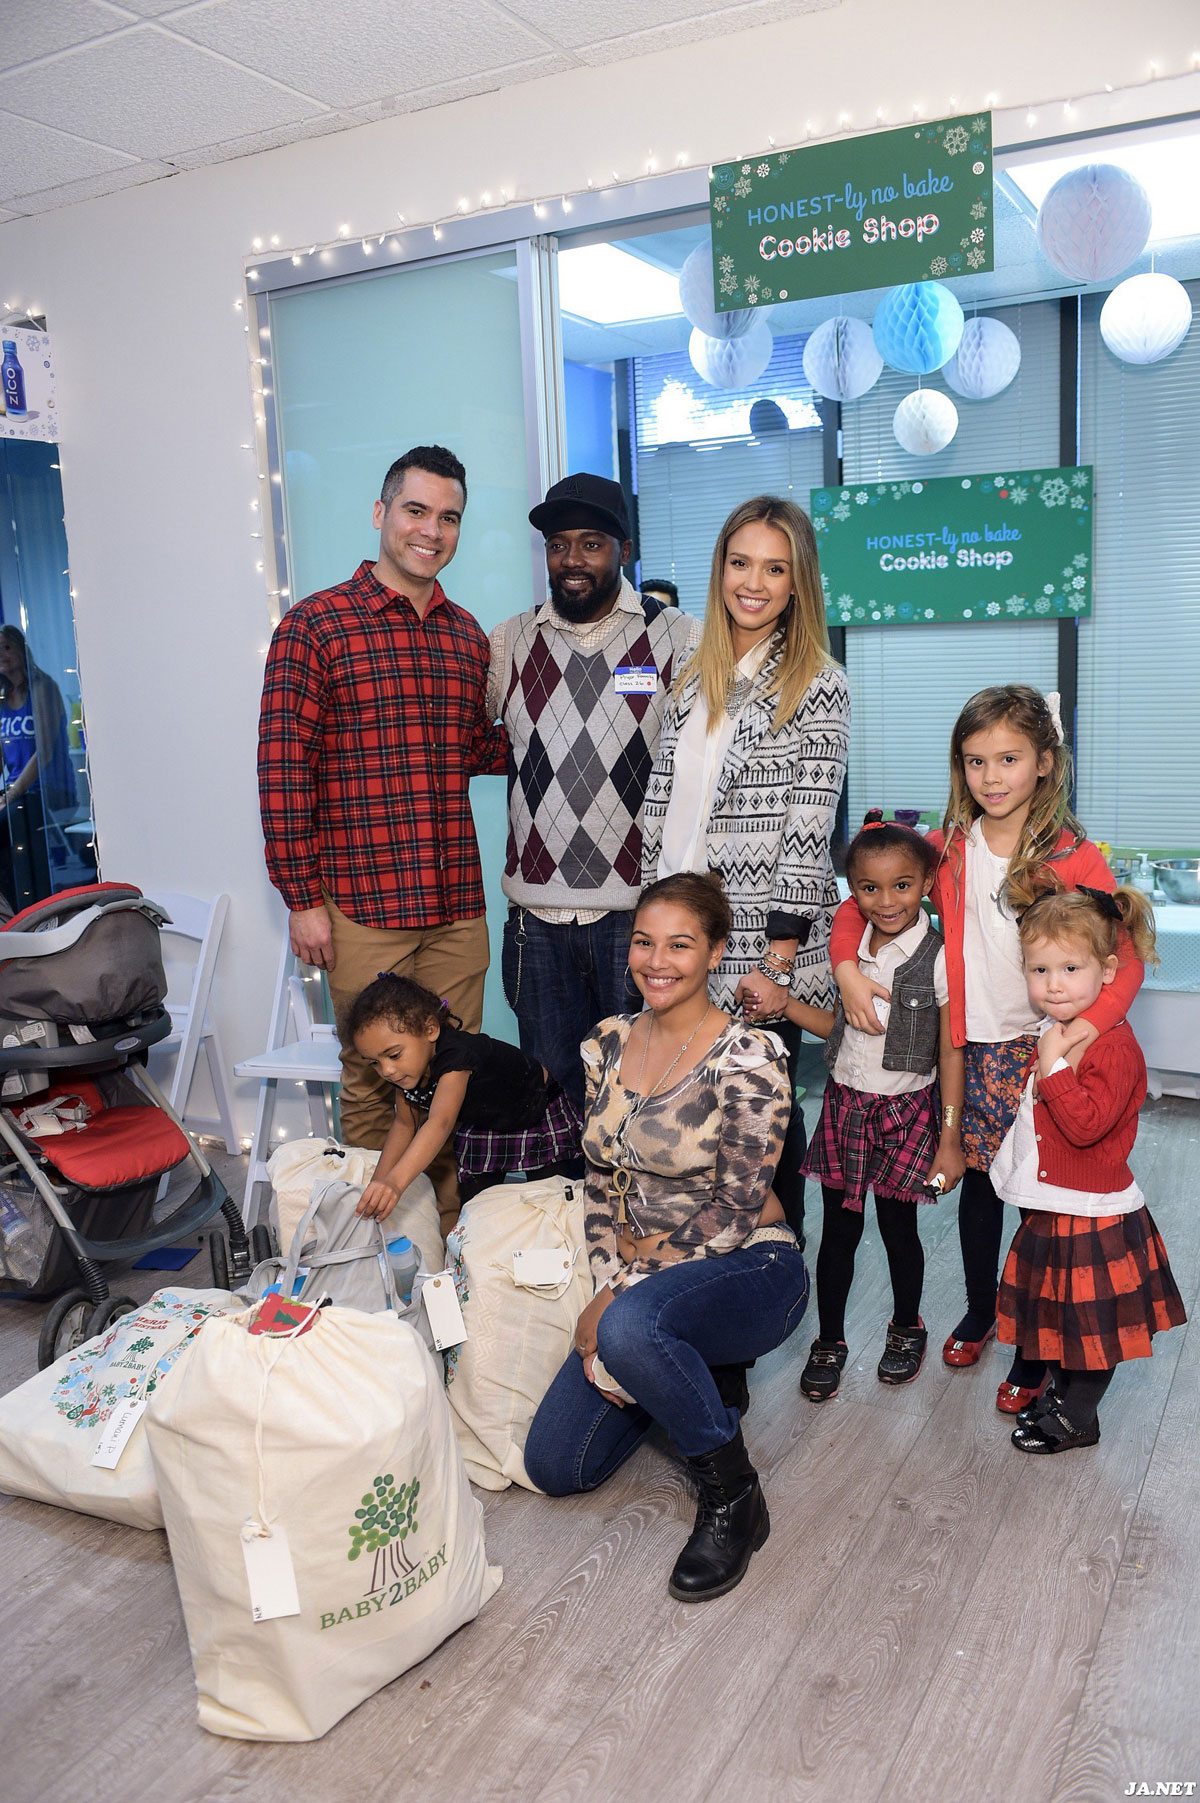 Jessica Alba attends Baby2Baby Holiday Party